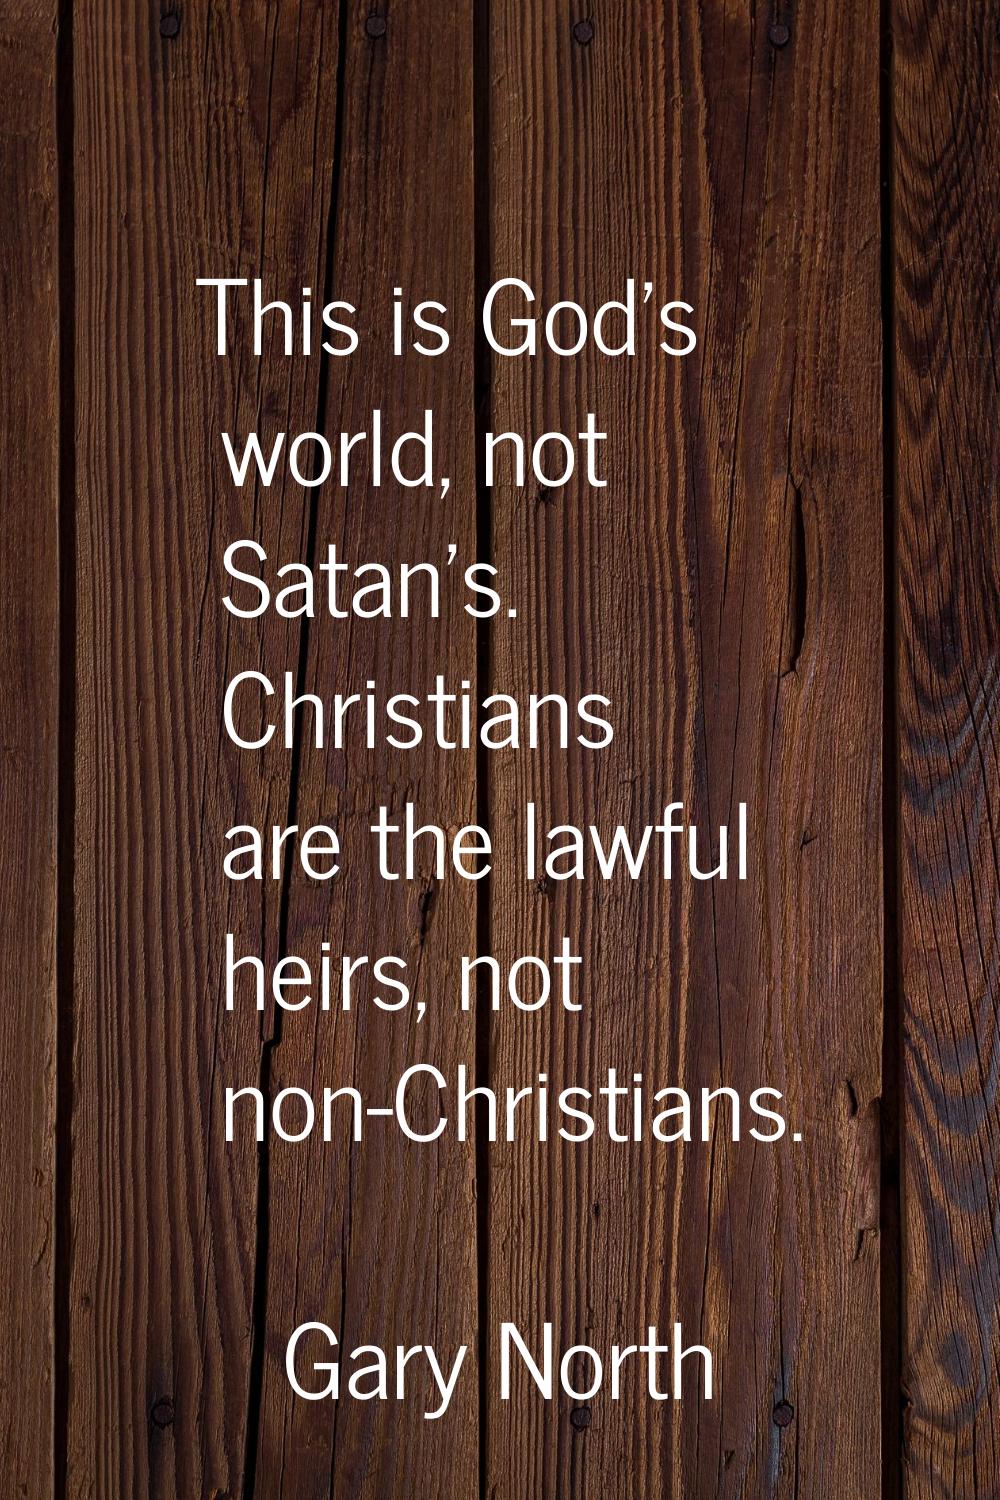 This is God's world, not Satan's. Christians are the lawful heirs, not non-Christians.